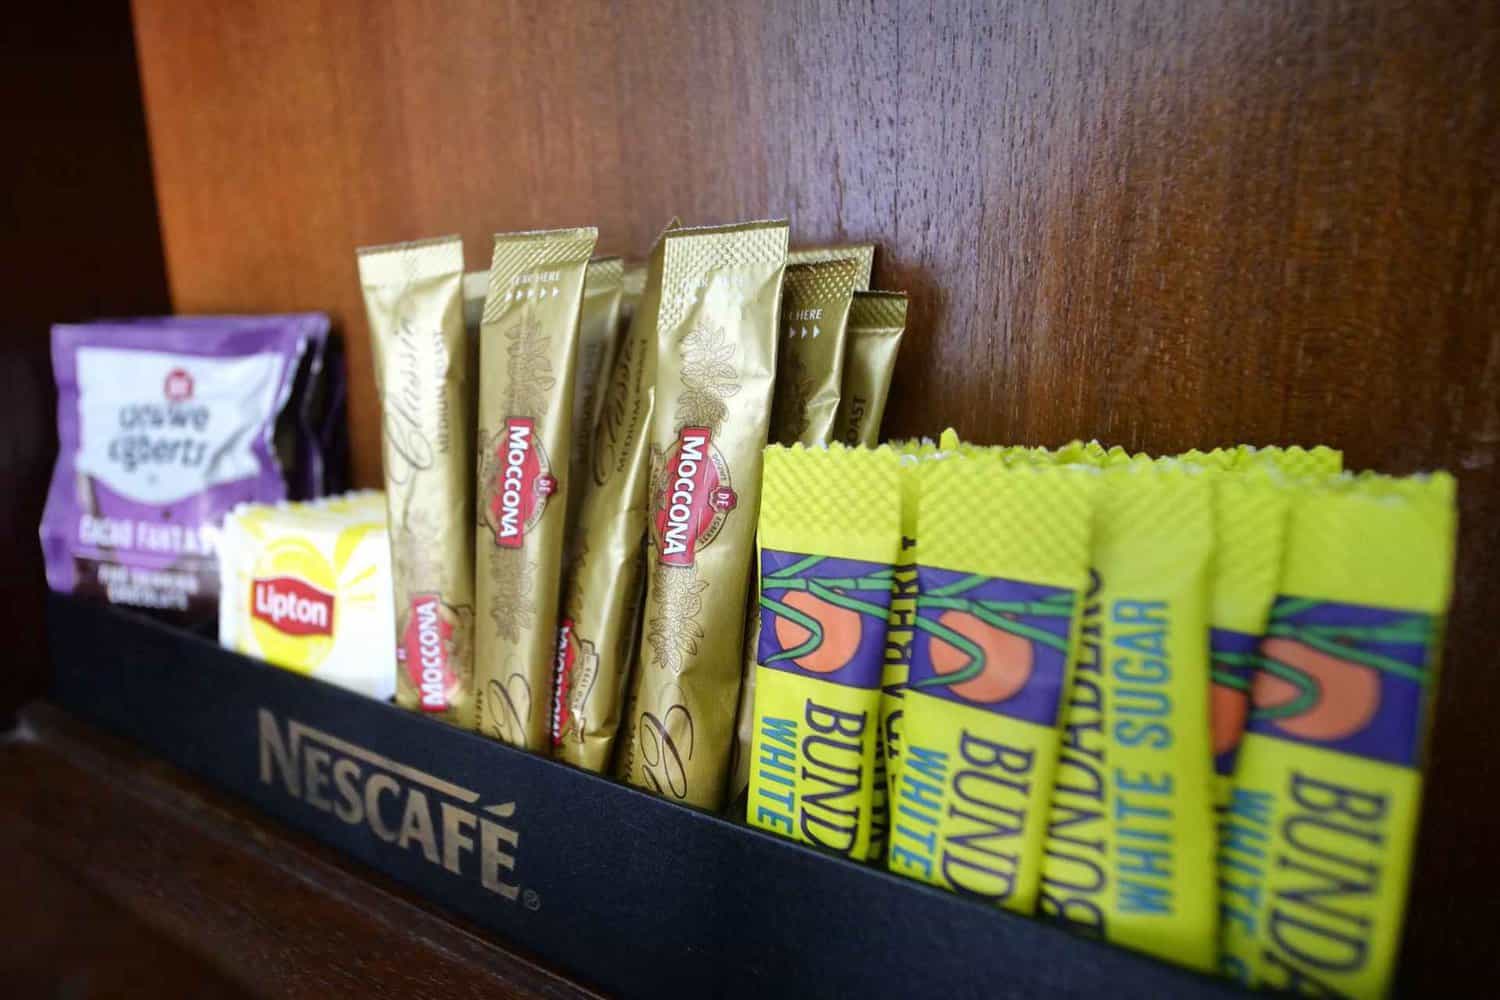 Assortment of sugar sticks, coffee sticks, hot chocolate powder, and tea bags thoughtfully displayed in a hotel room, offering a variety of beverage options for guests during their extended stay